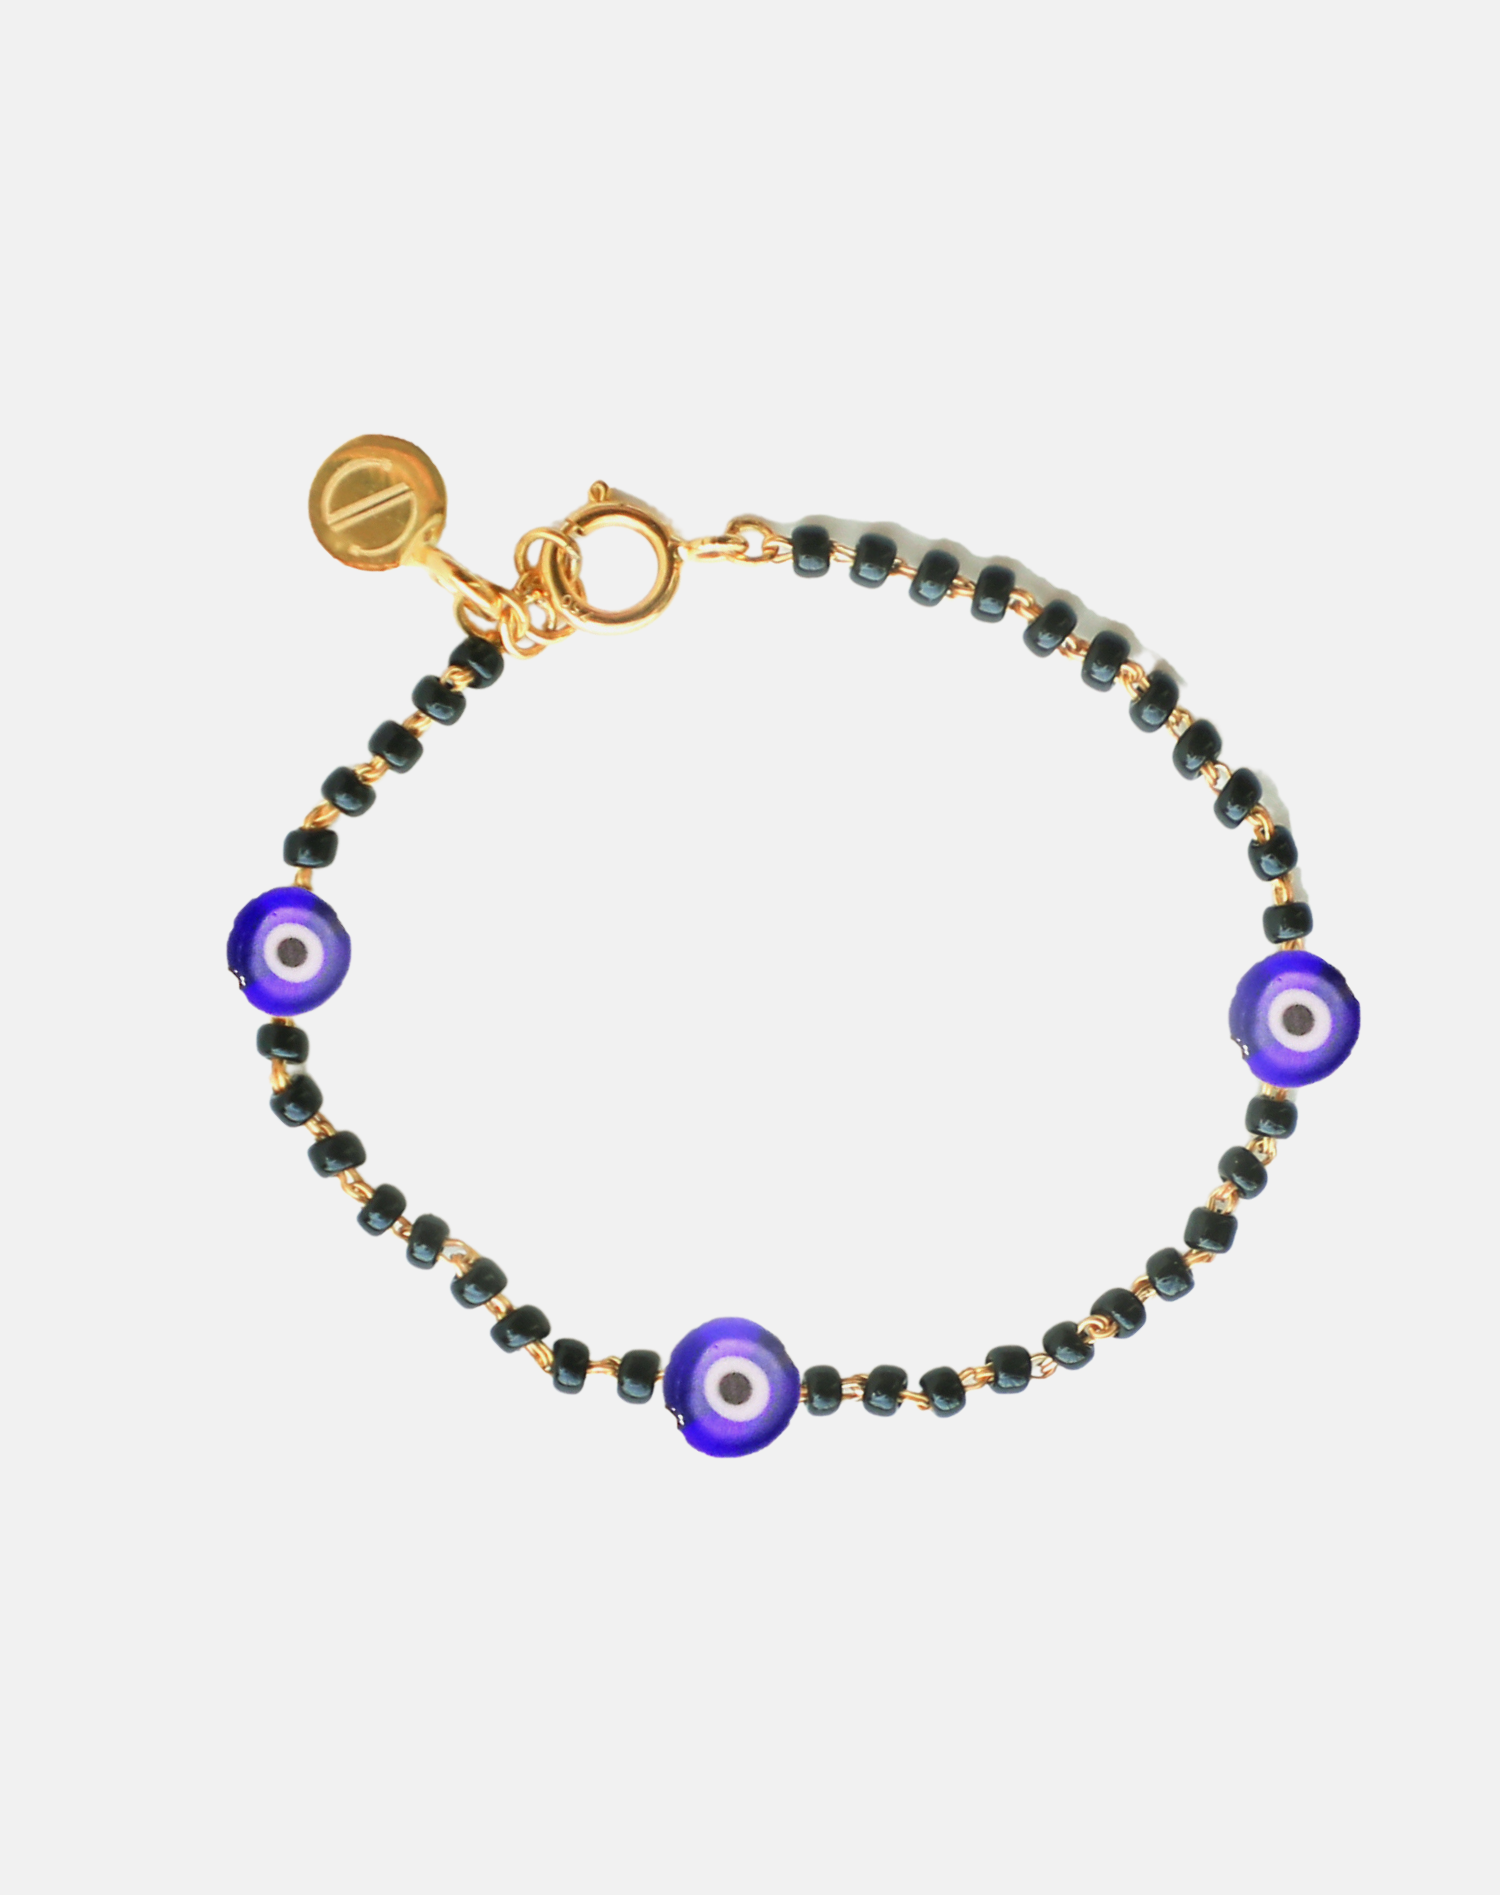 Red Evil Eye Bracelet for Protection and Good Luck – Moon Dance Charms